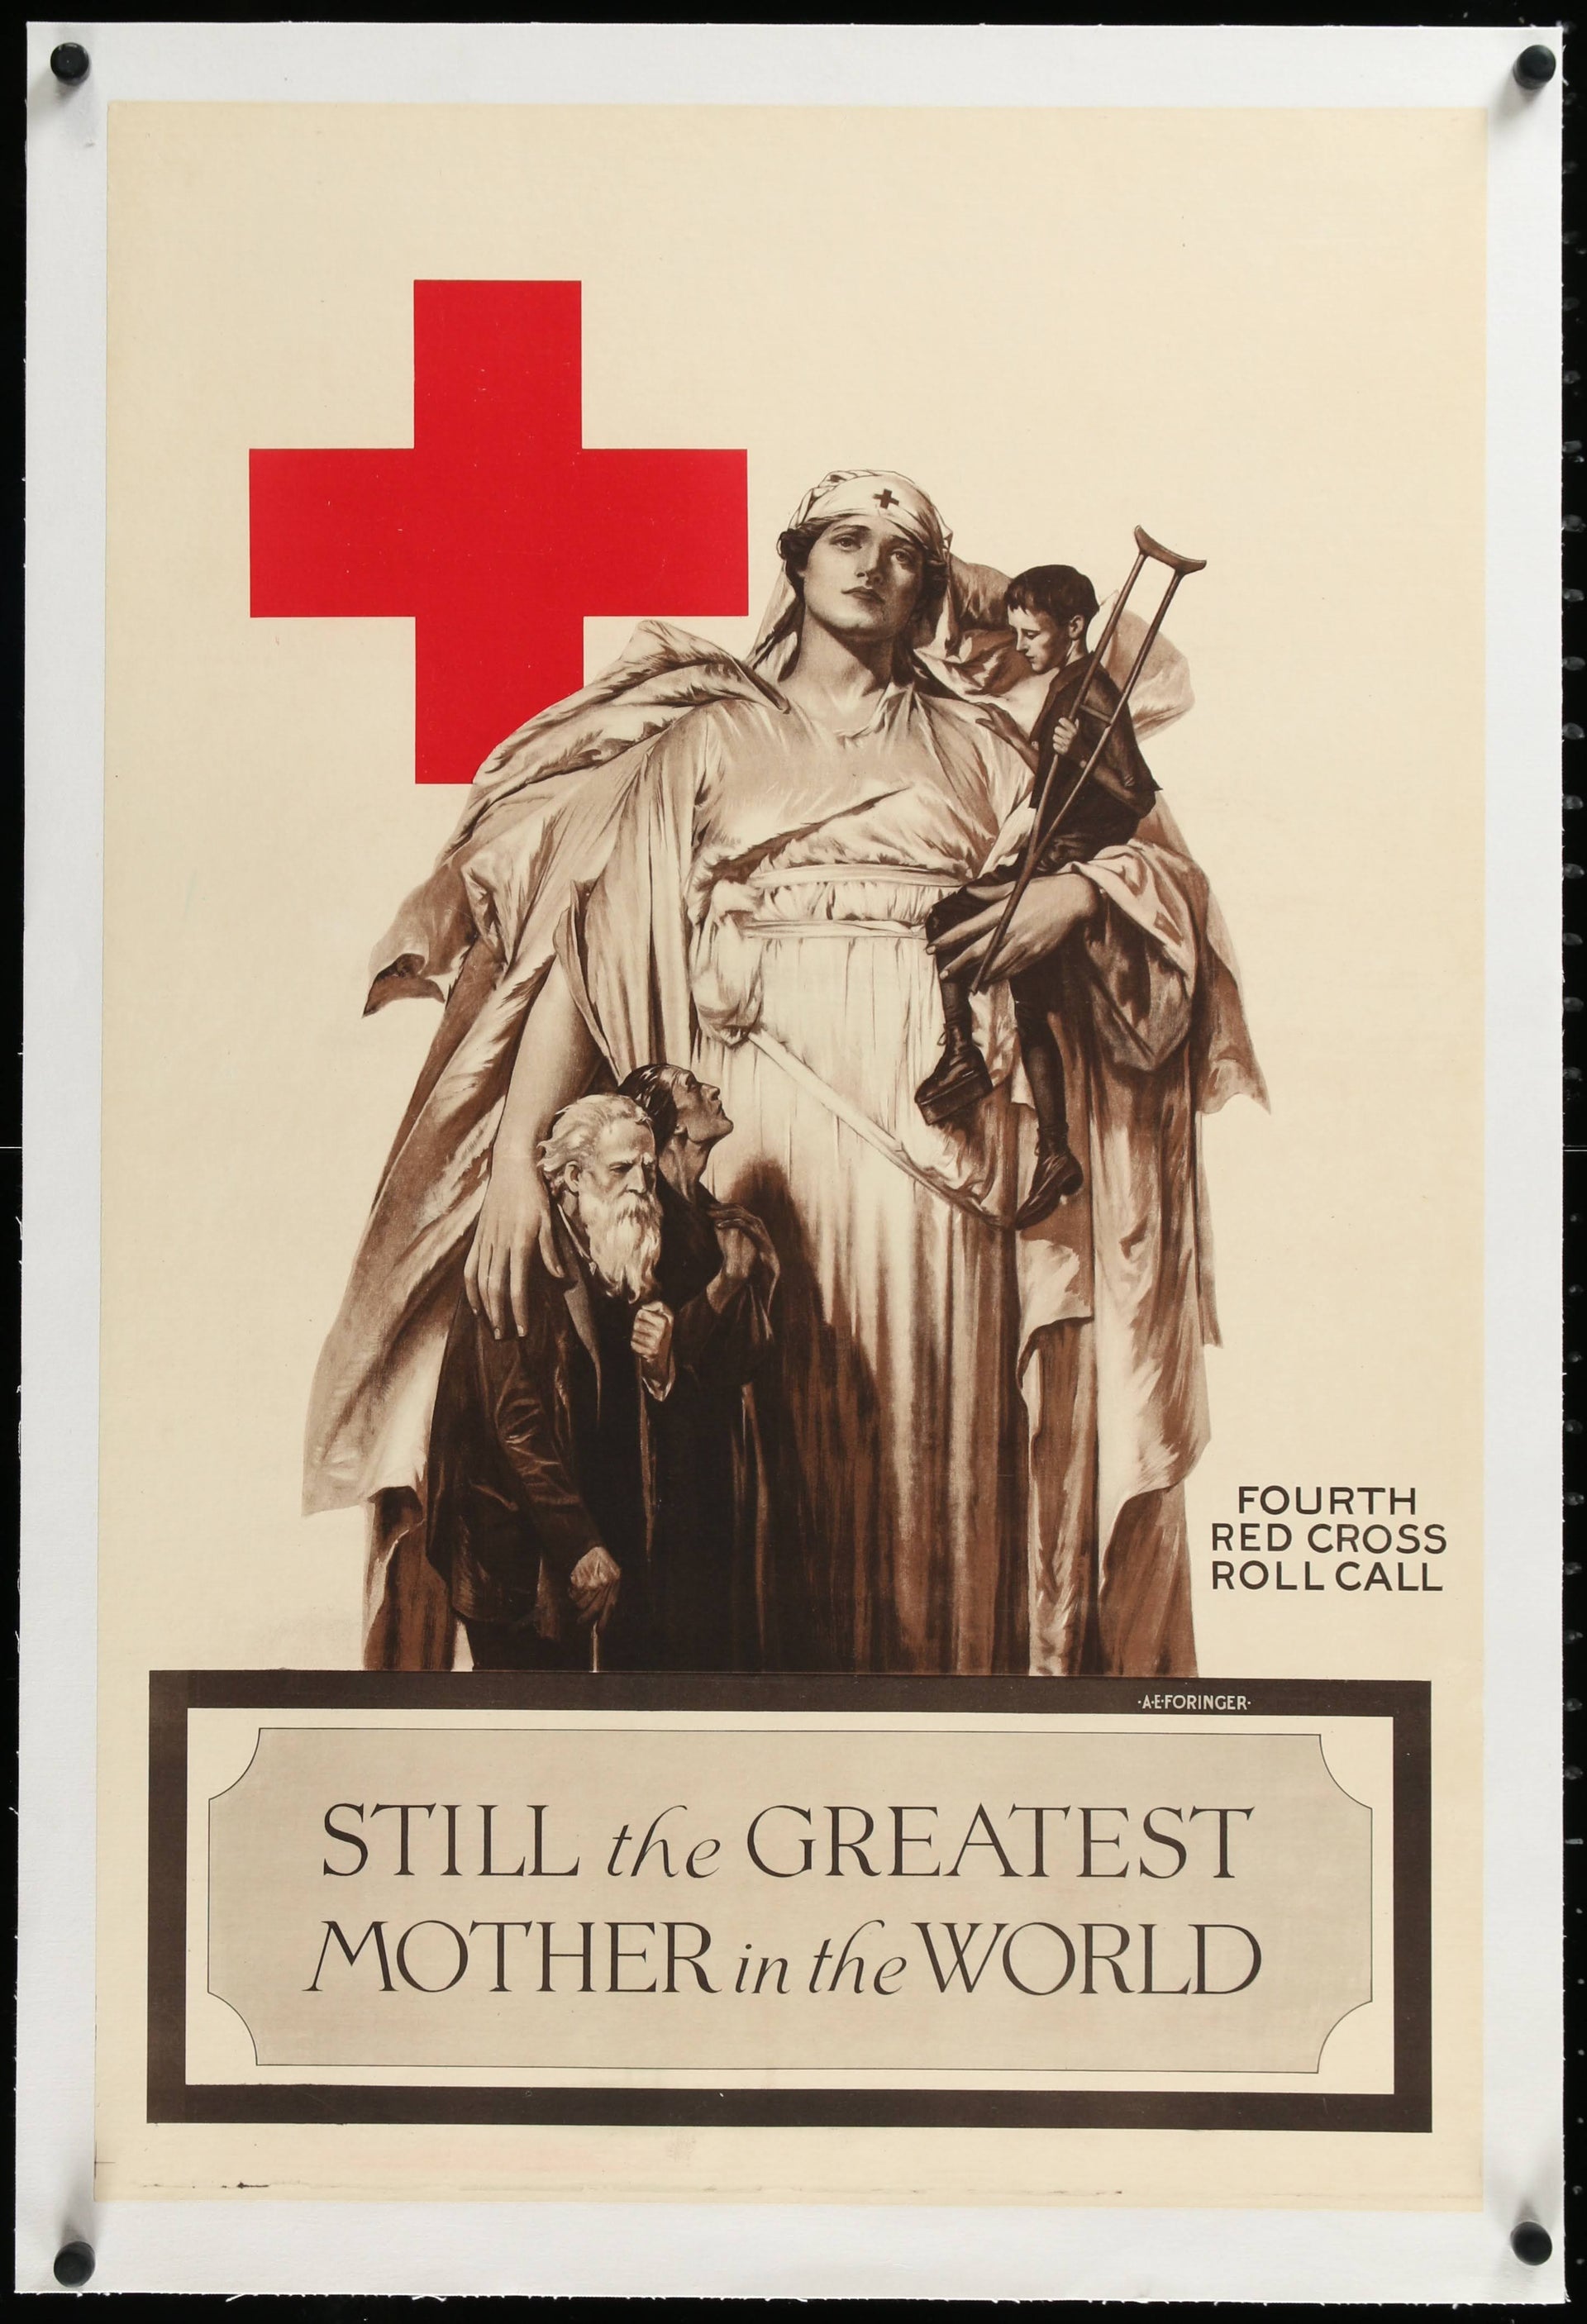 The Greatest Mother of the World by Alonzo Earl Foringer and American Red  Cross